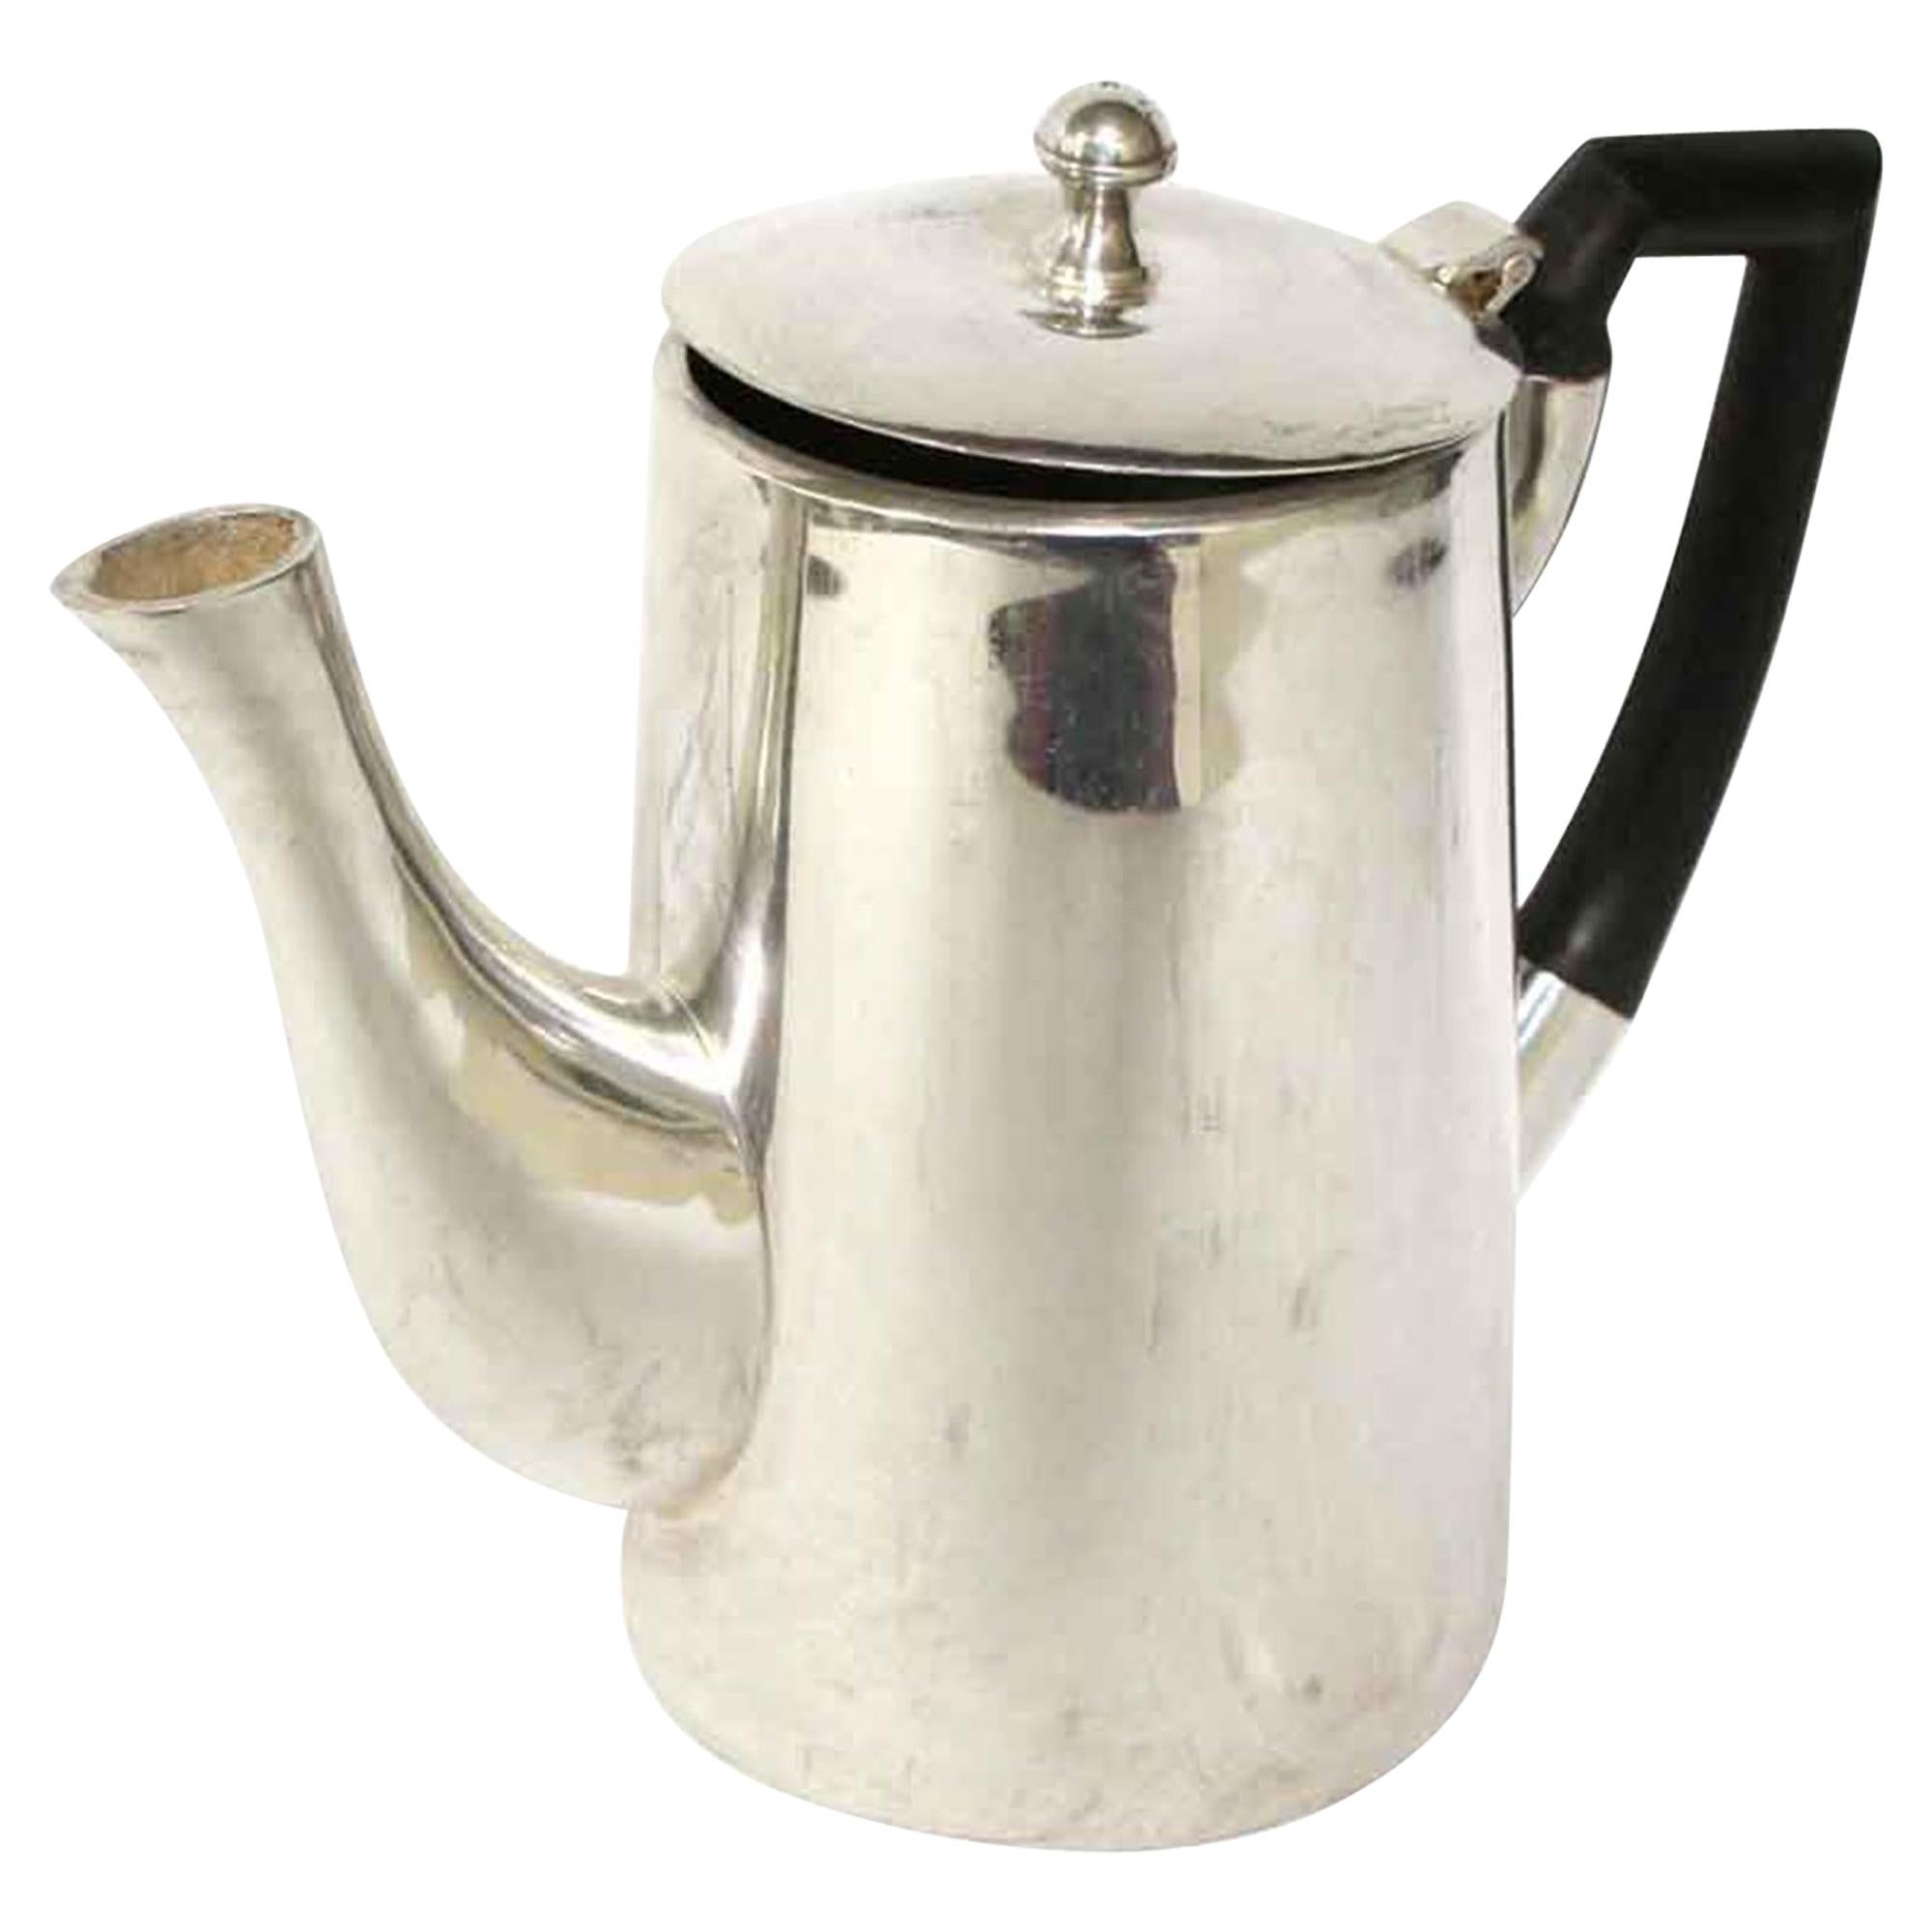 1950s NYC Waldorf Astoria Hotel MCM Silver Plated Tea Pot with Black Handle